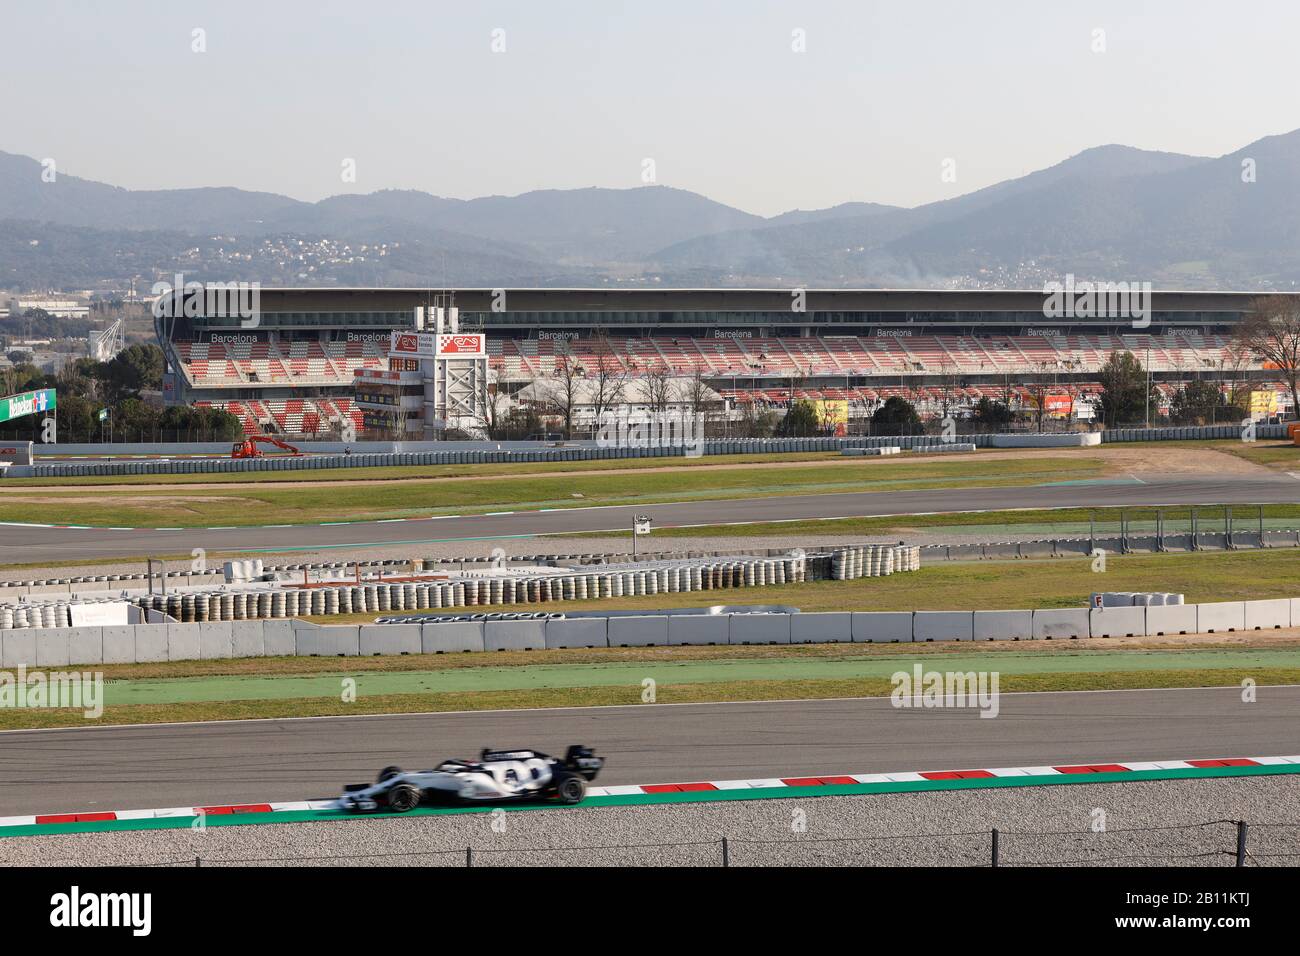 F1 Winter Testing at Montmelo circuit, Barcelona, Spain Stock Photo